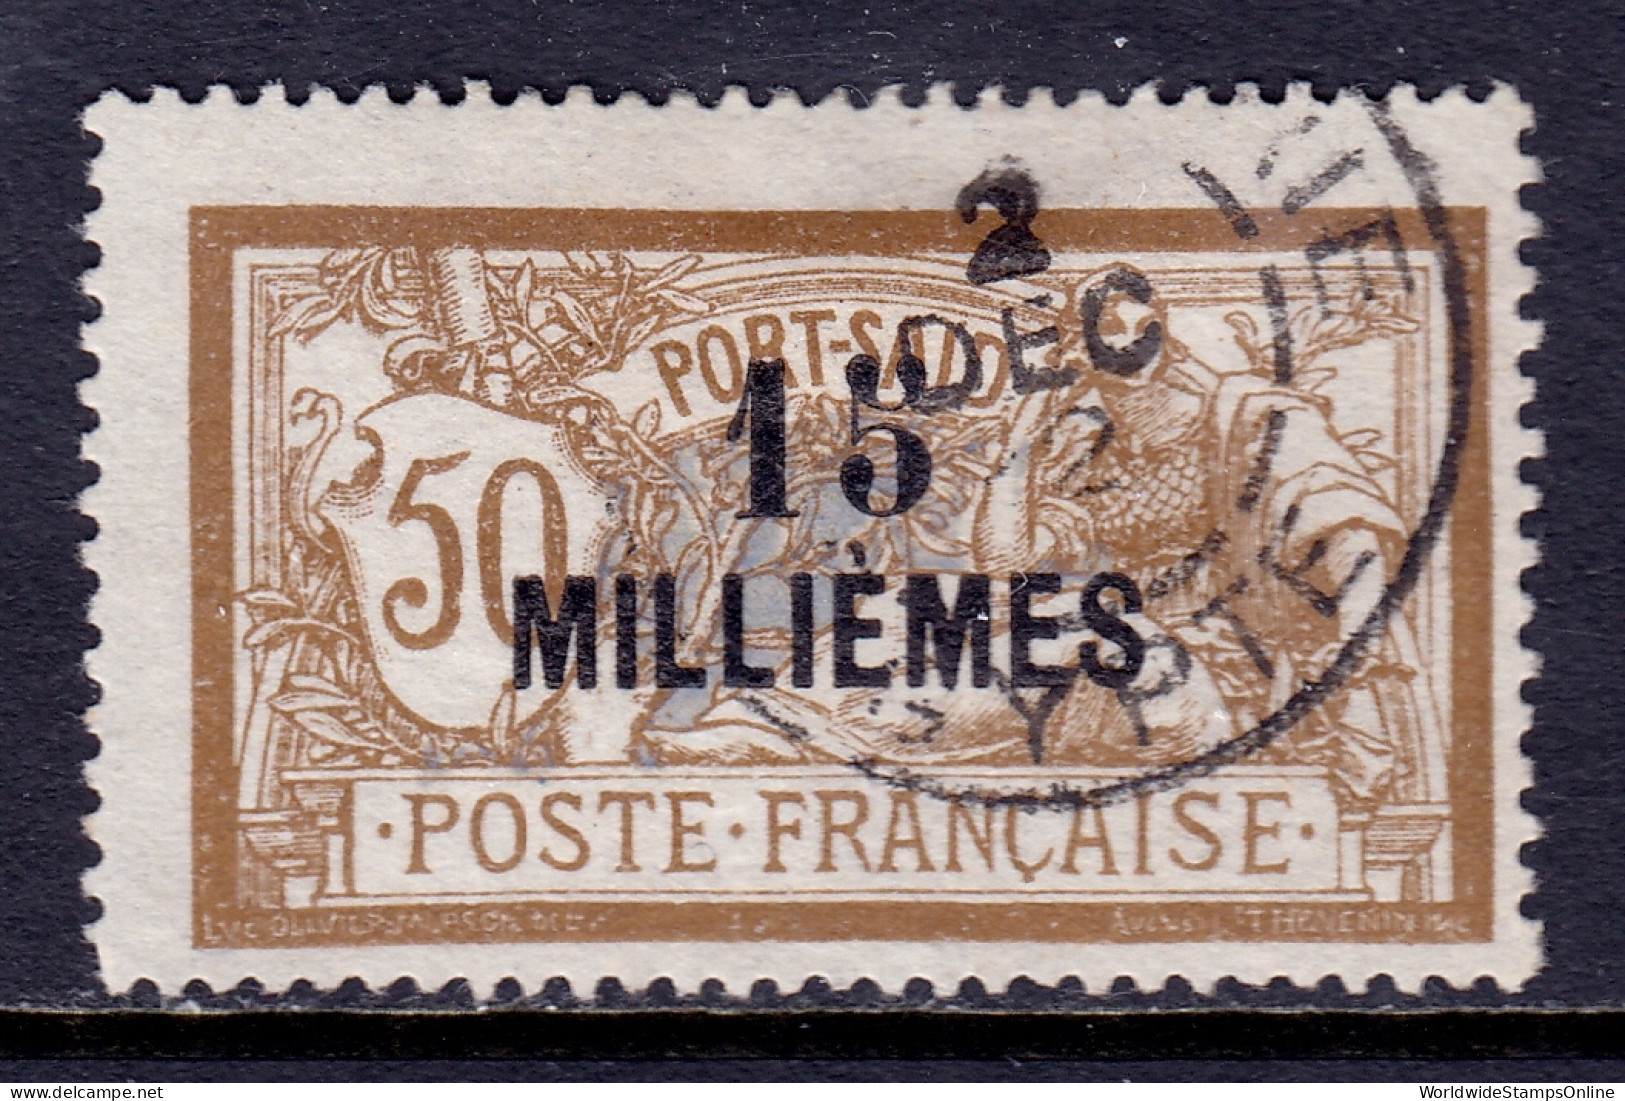 France (Offices In Port Said) - Scott #65 - Used - See Desc. - SCV $6.00 - Used Stamps